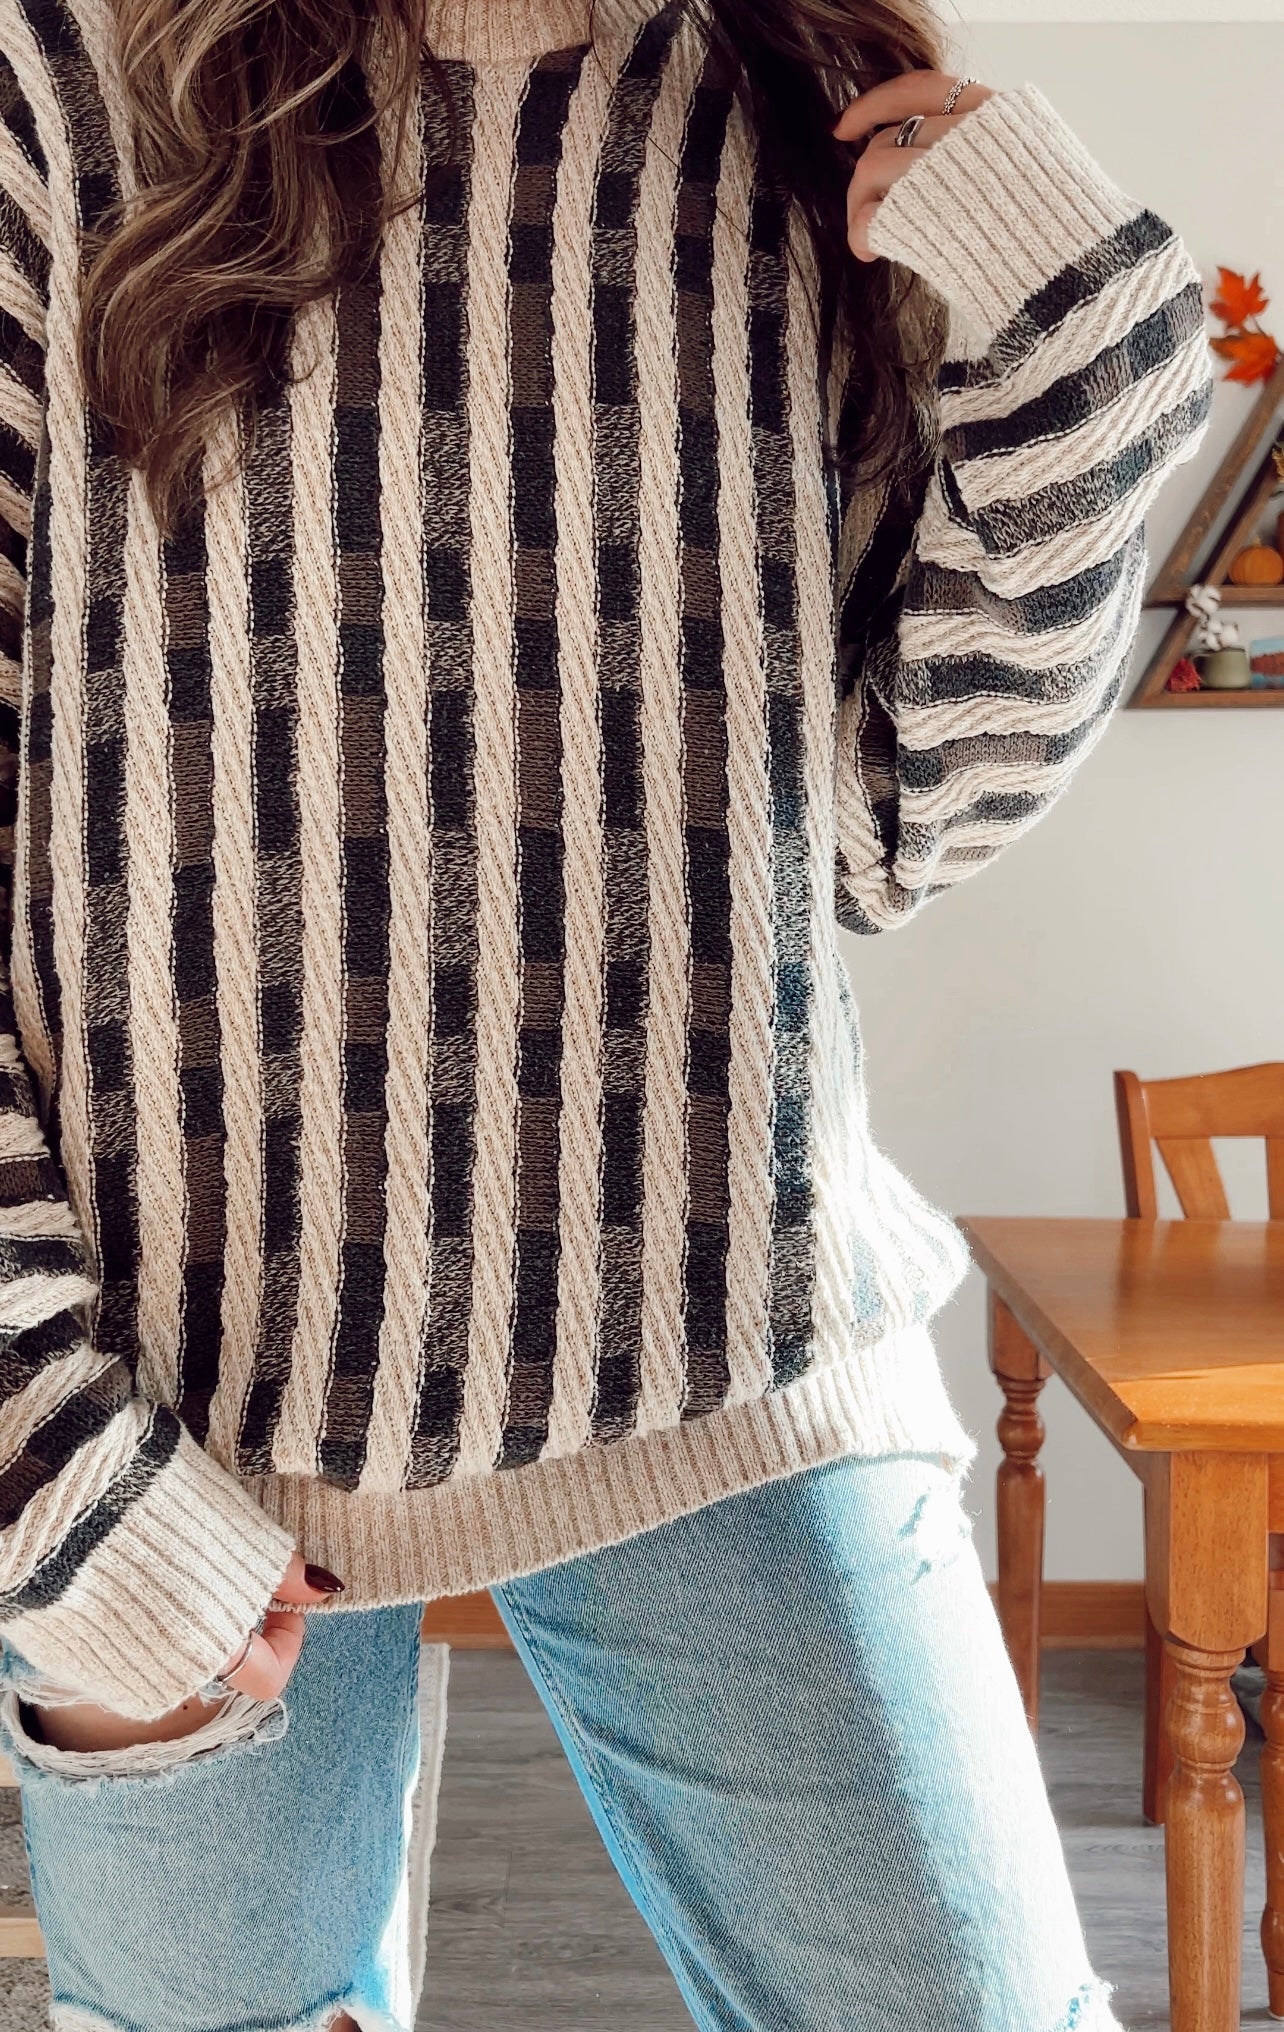 Vintage Towncraft Striped Knit Sweater